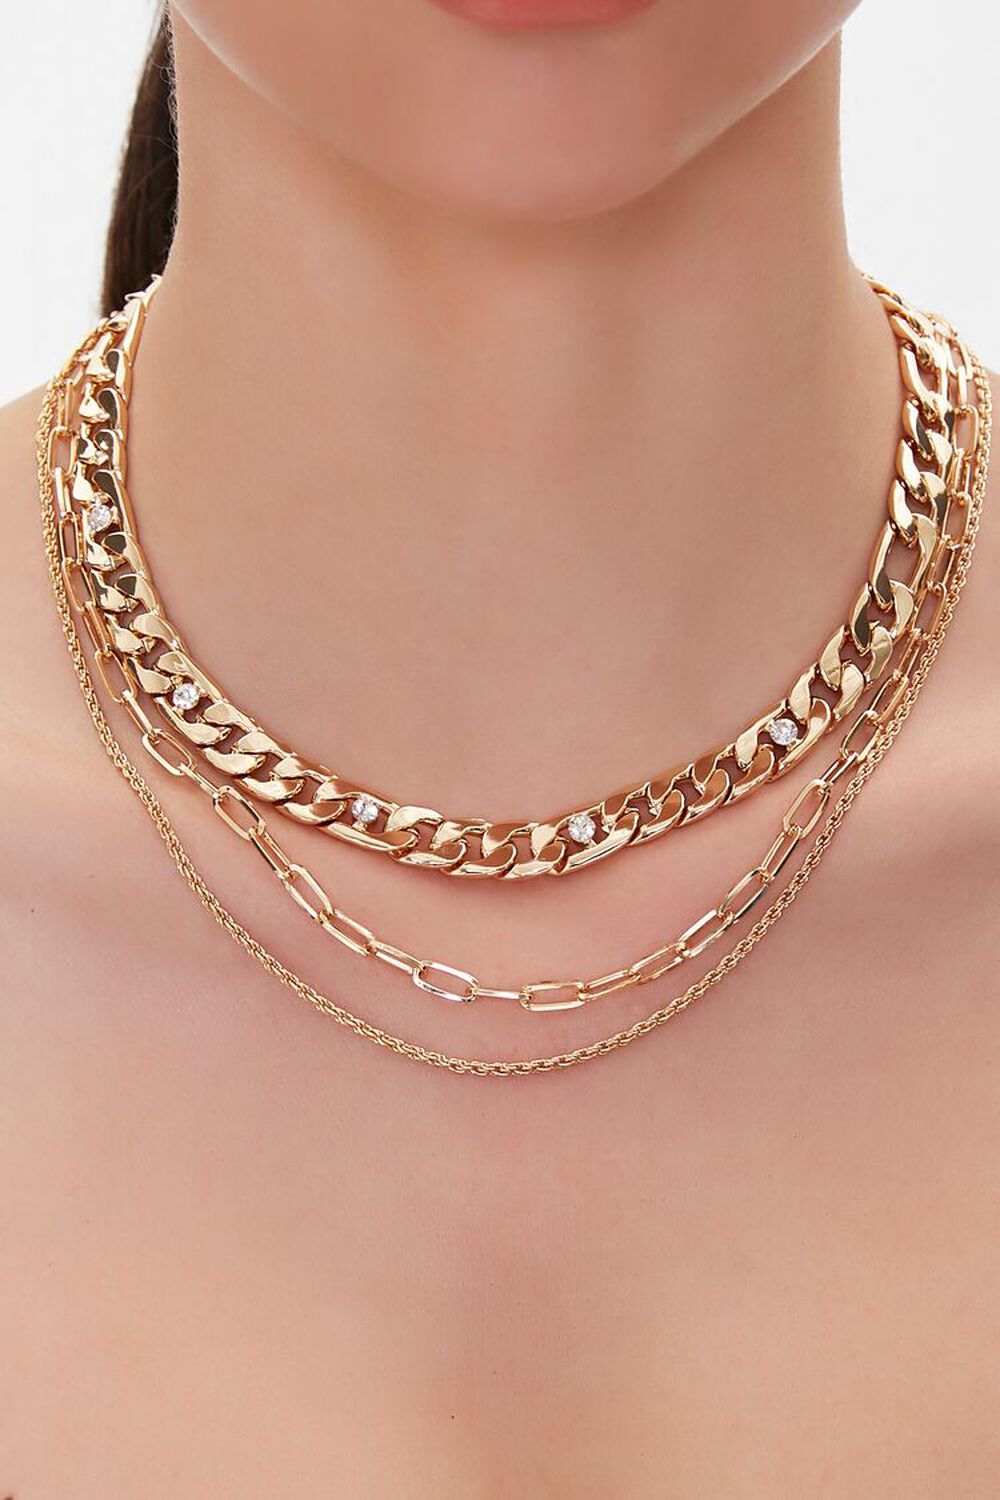 GOLD Chunky Chain Layered Necklace, image 1